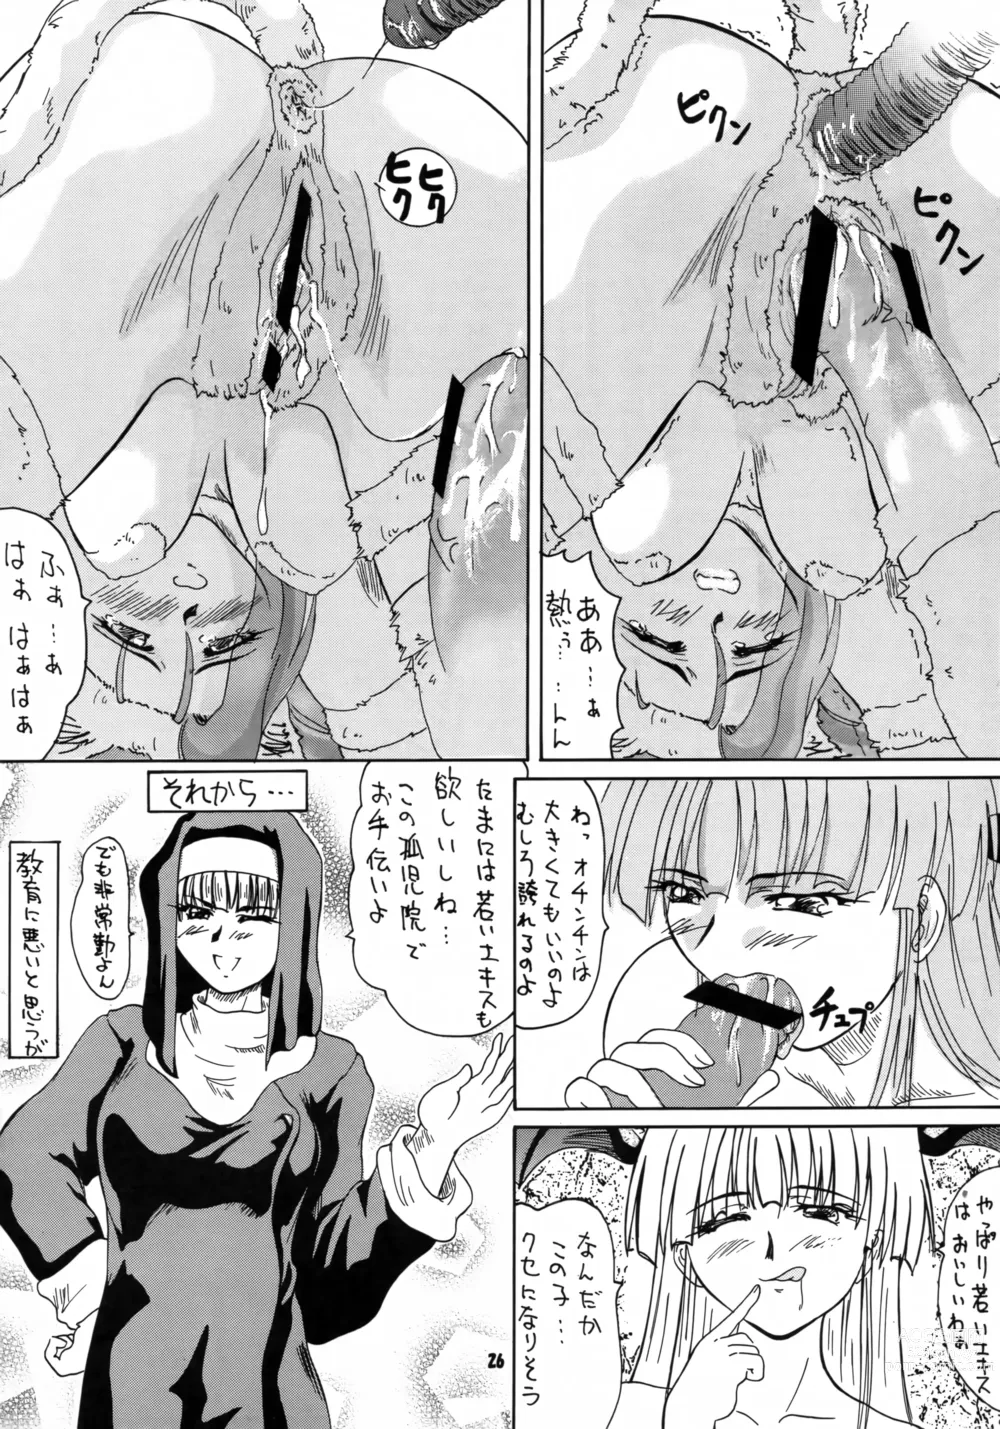 Page 25 of doujinshi 2STROKE TZR